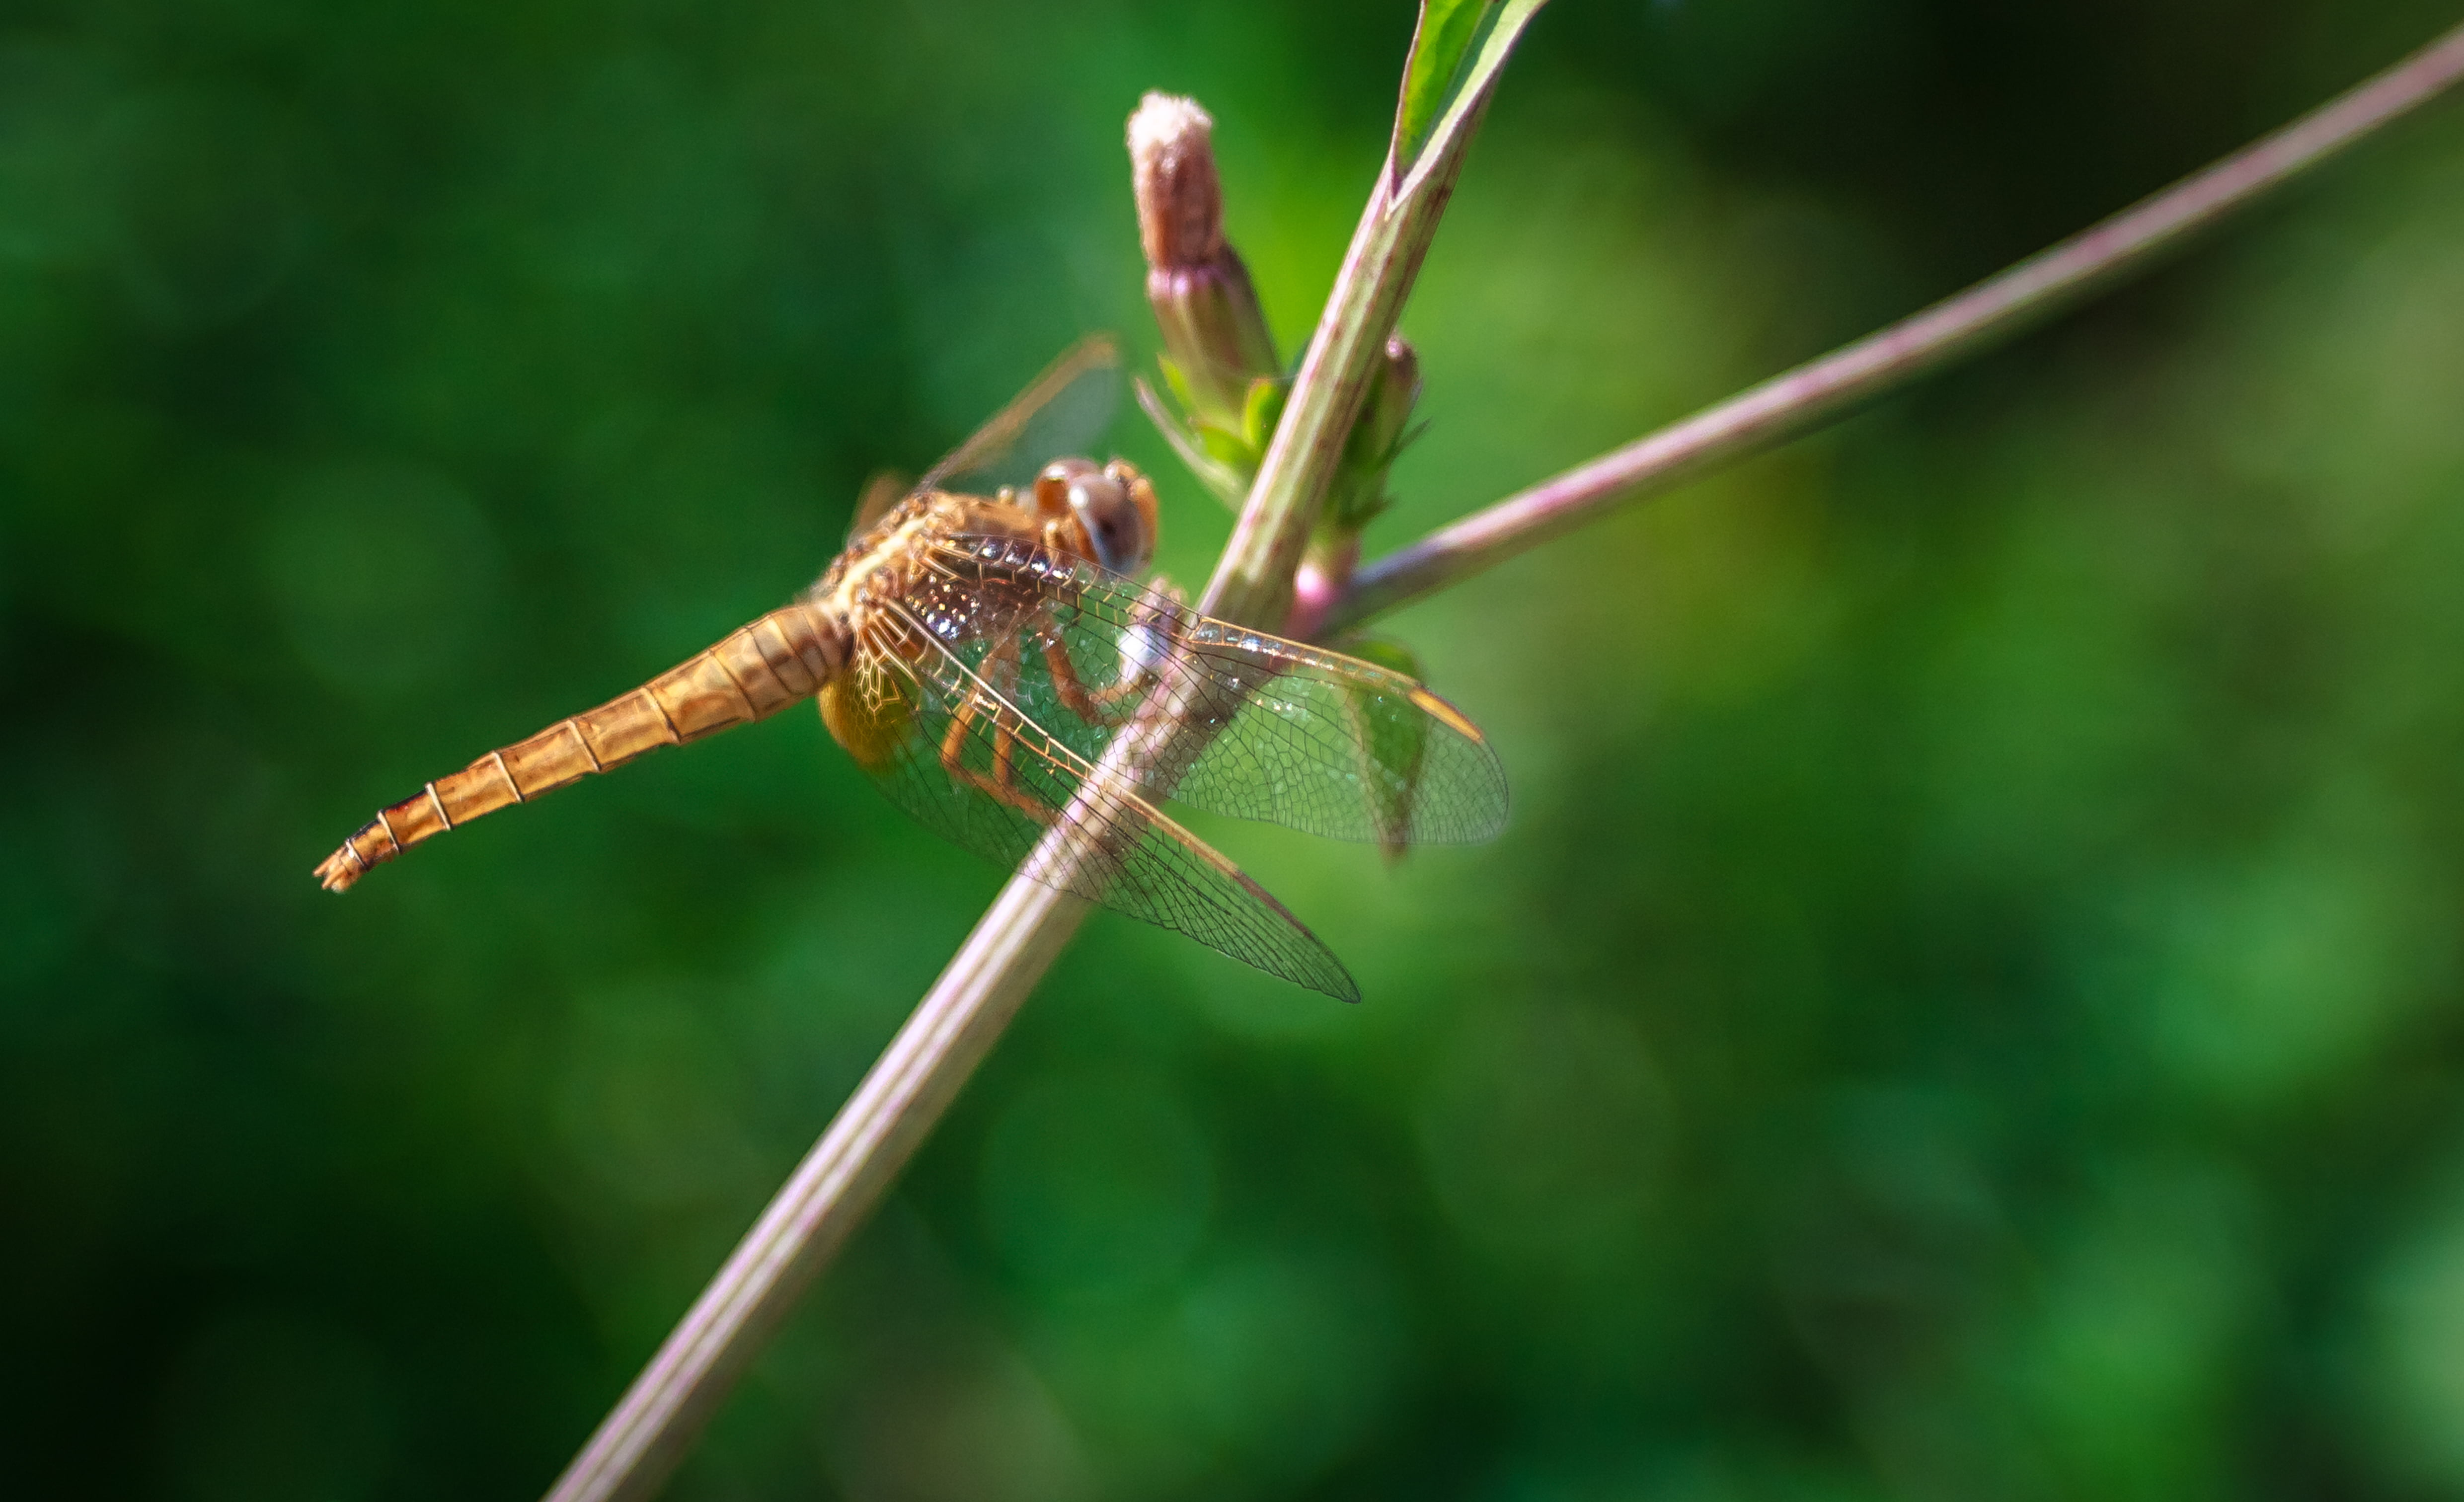 brown dragonfly on green twig